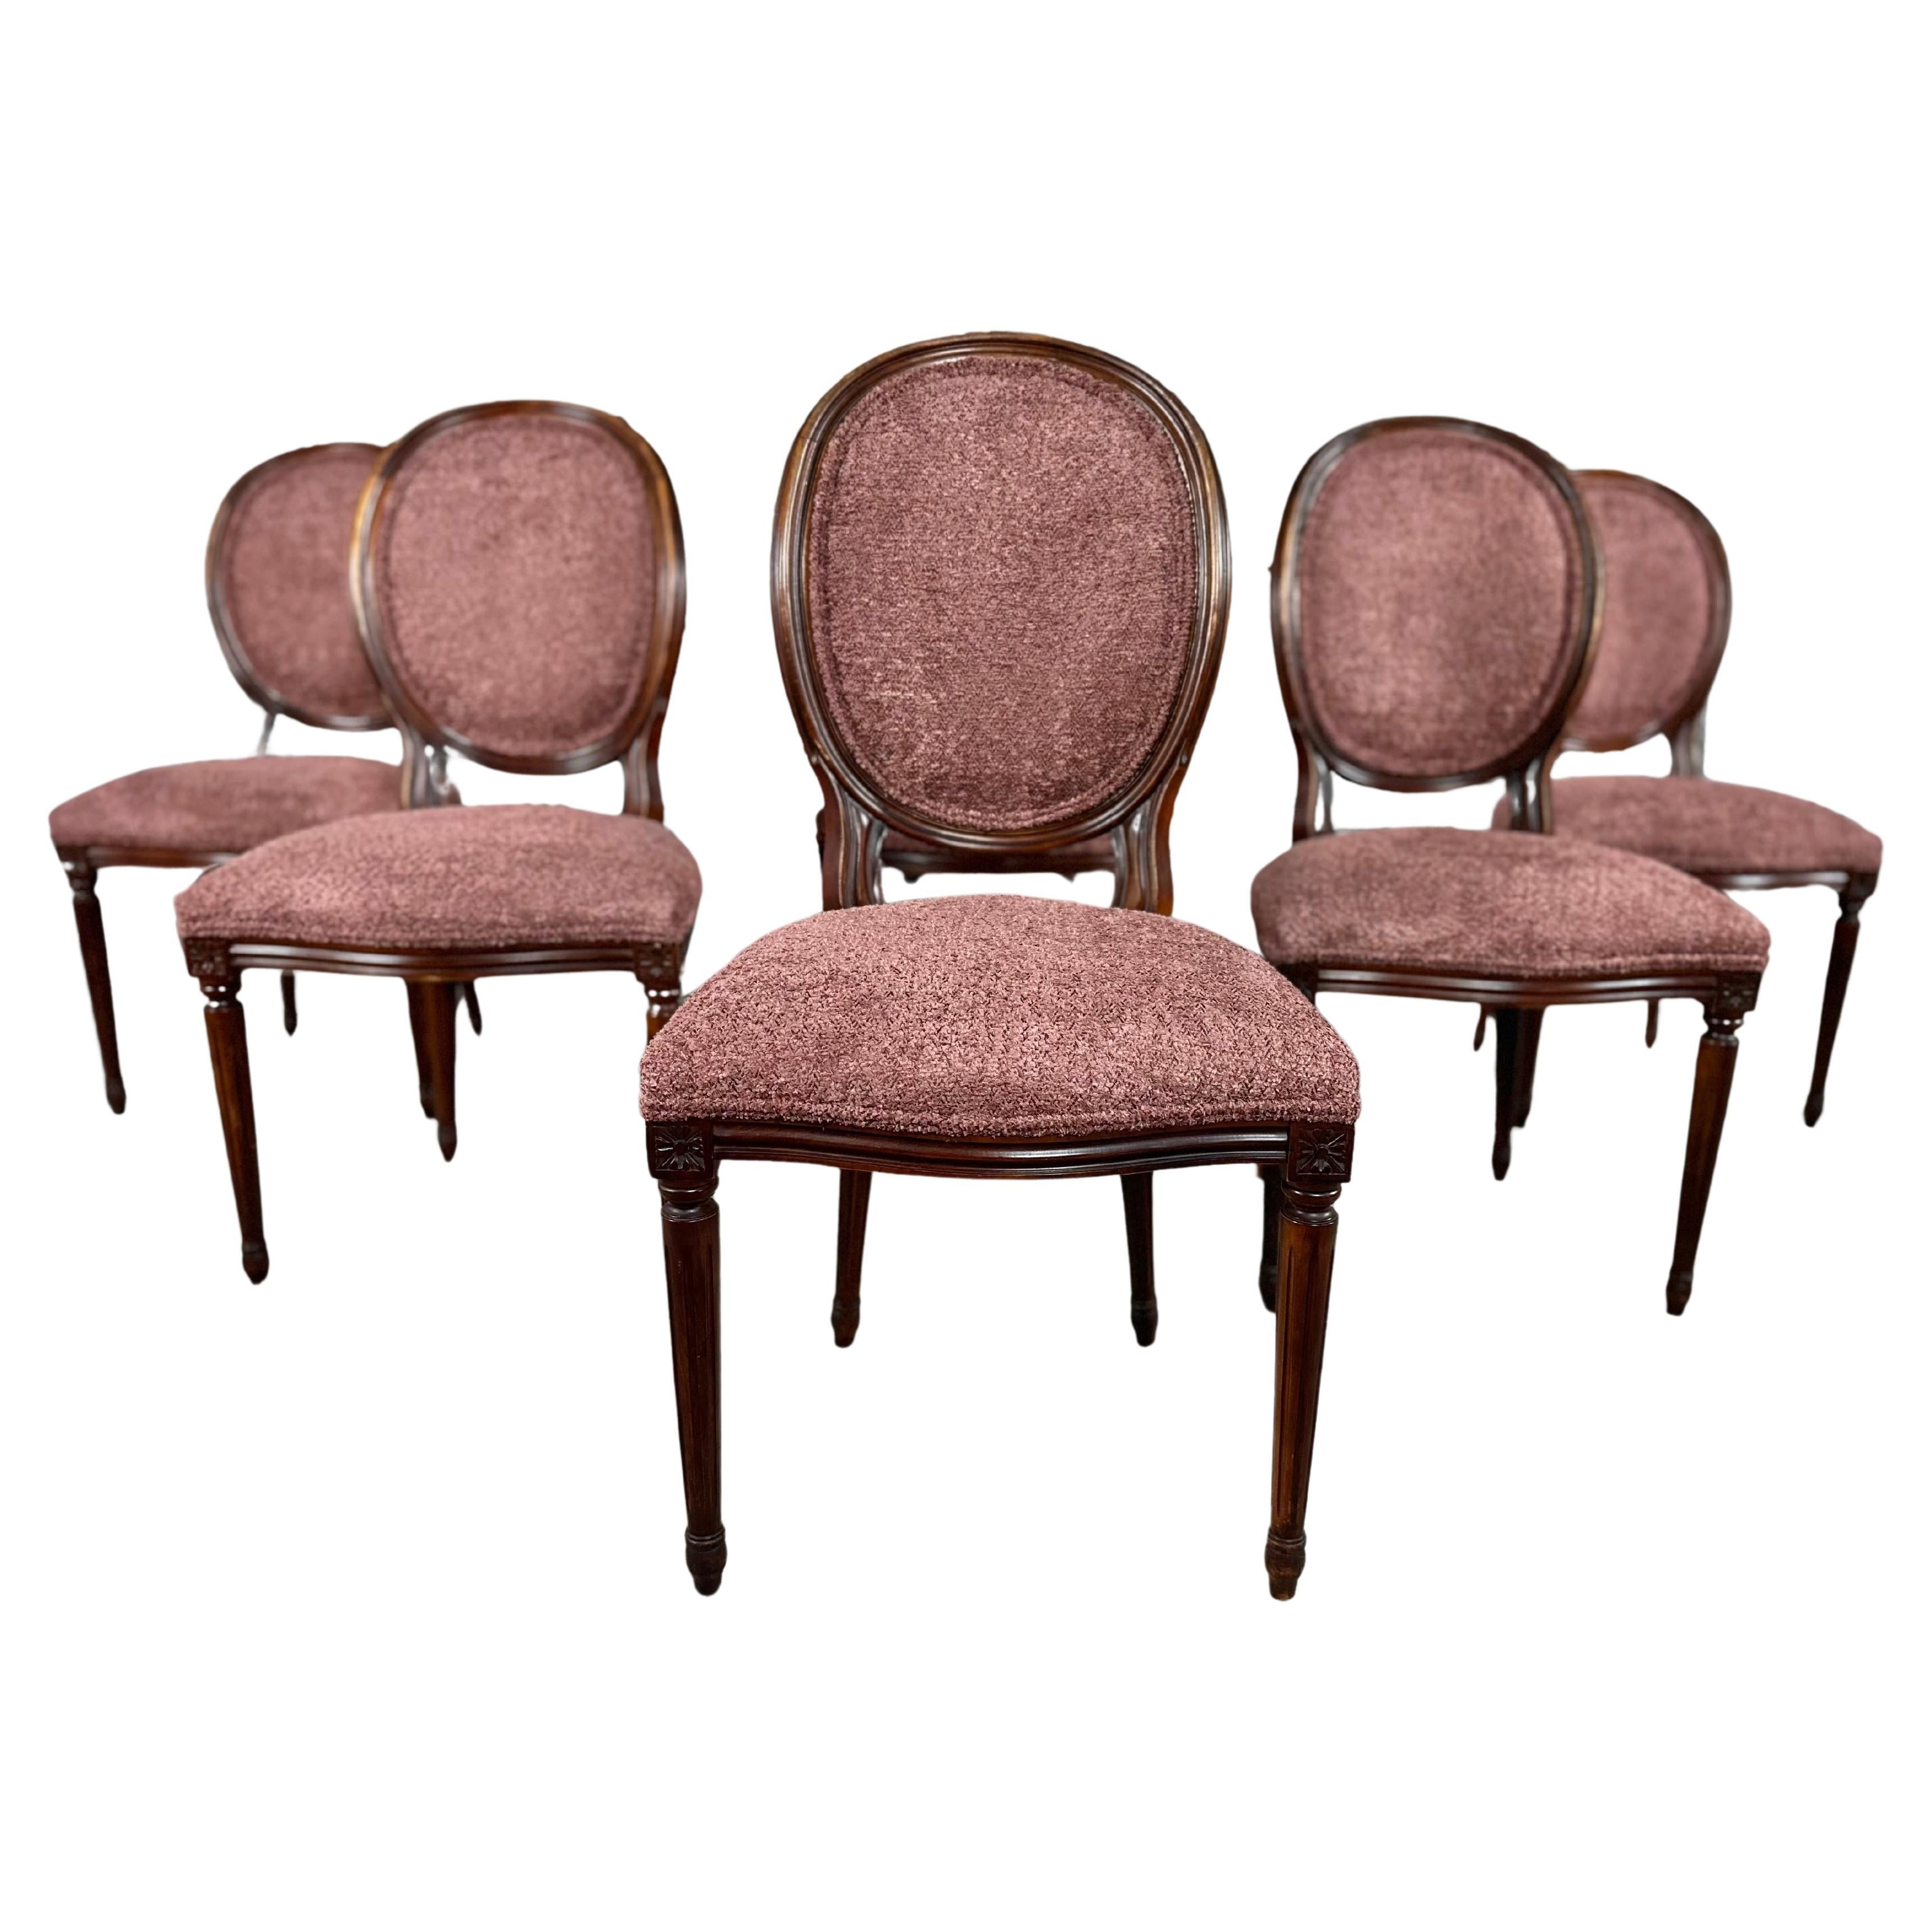 French Louis XVI Medallion Back Dining Chairs, Reupholstered - Set of 6